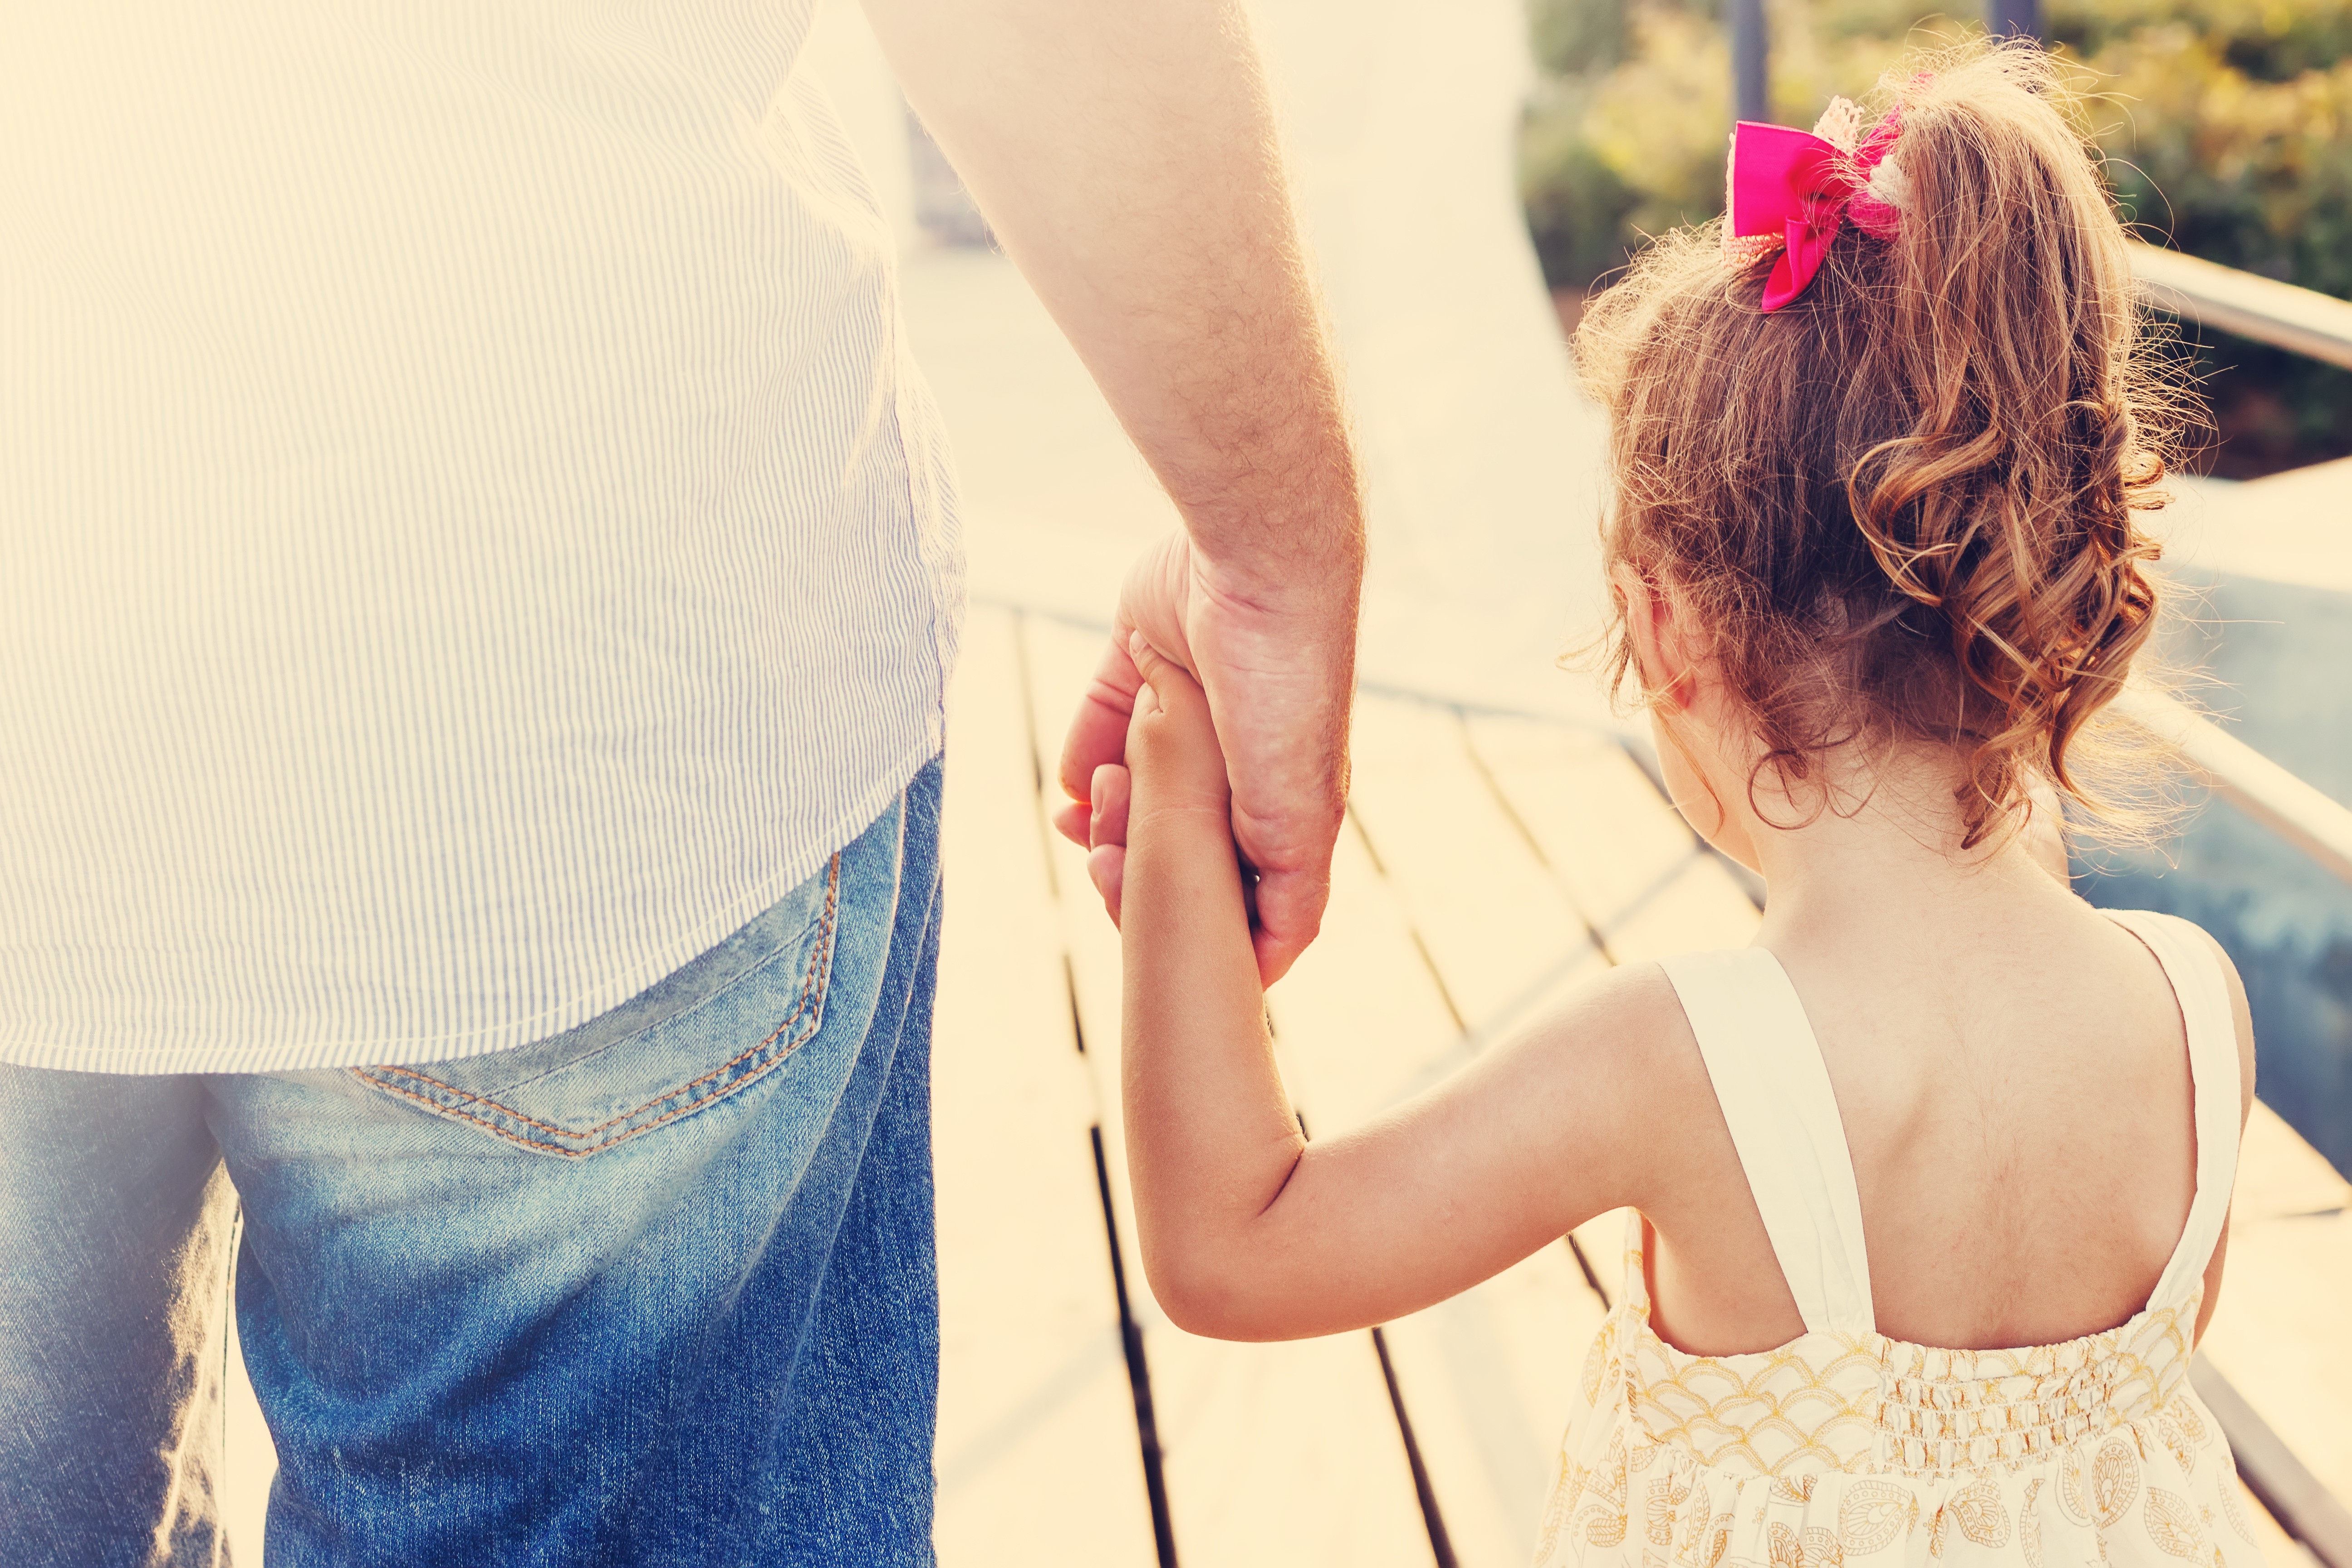 Father and daughter holding hands | Source: Shutterstock